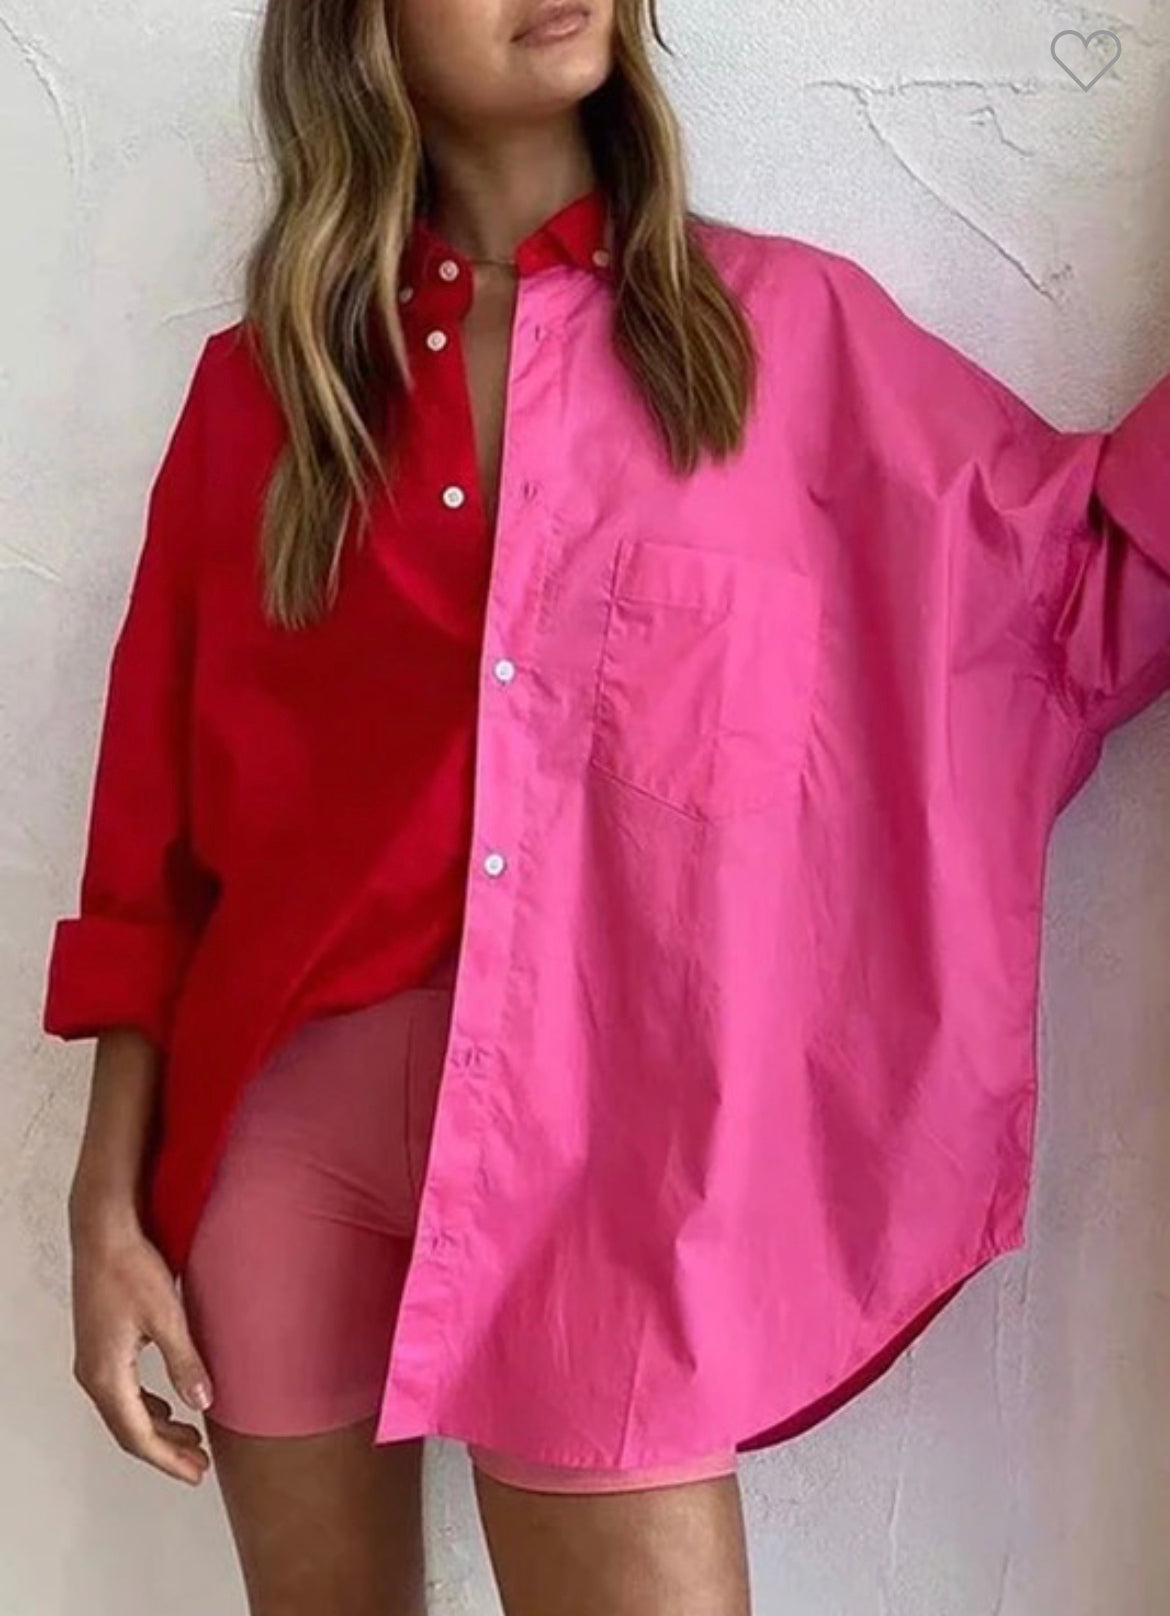 Two-tone Red/Pink Button up